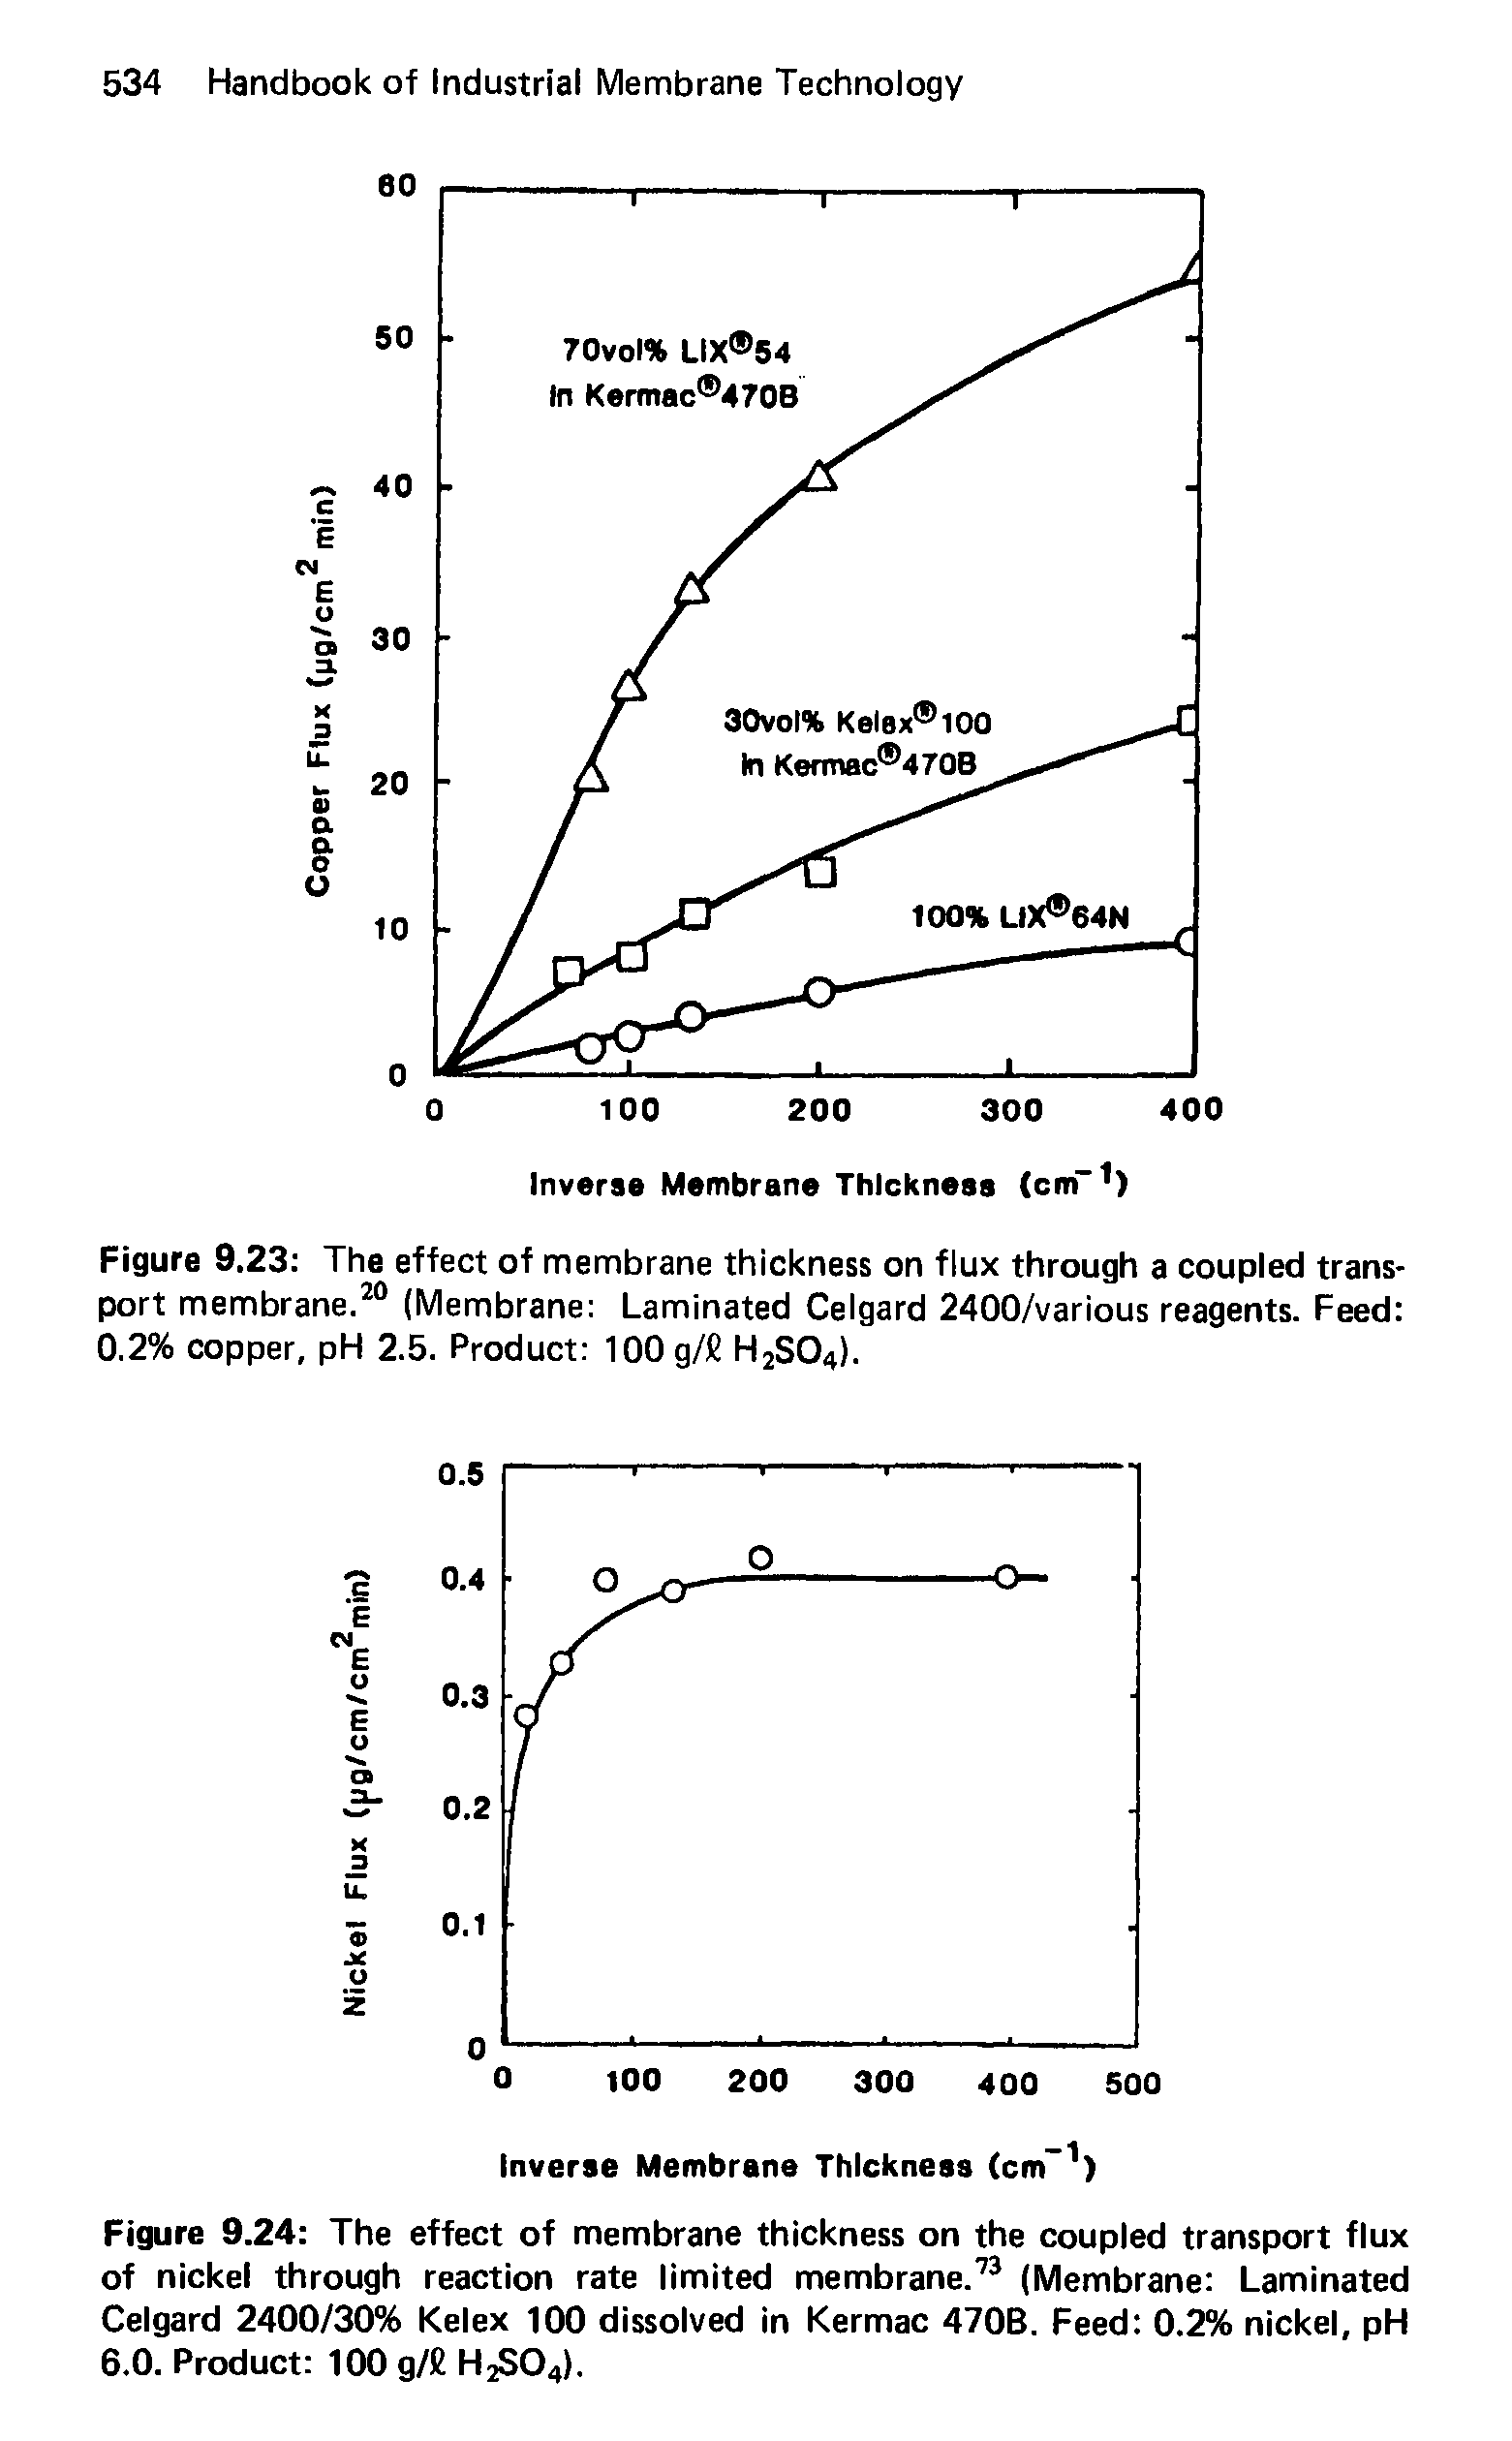 Figure 9.23 The effect of membrane thickness on flux through a coupled transport membrane.20 (Membrane Laminated Celgard 2400/various reagents. Feed 0.2% copper, pH 2.5. Product 100 g/C H2SO4).